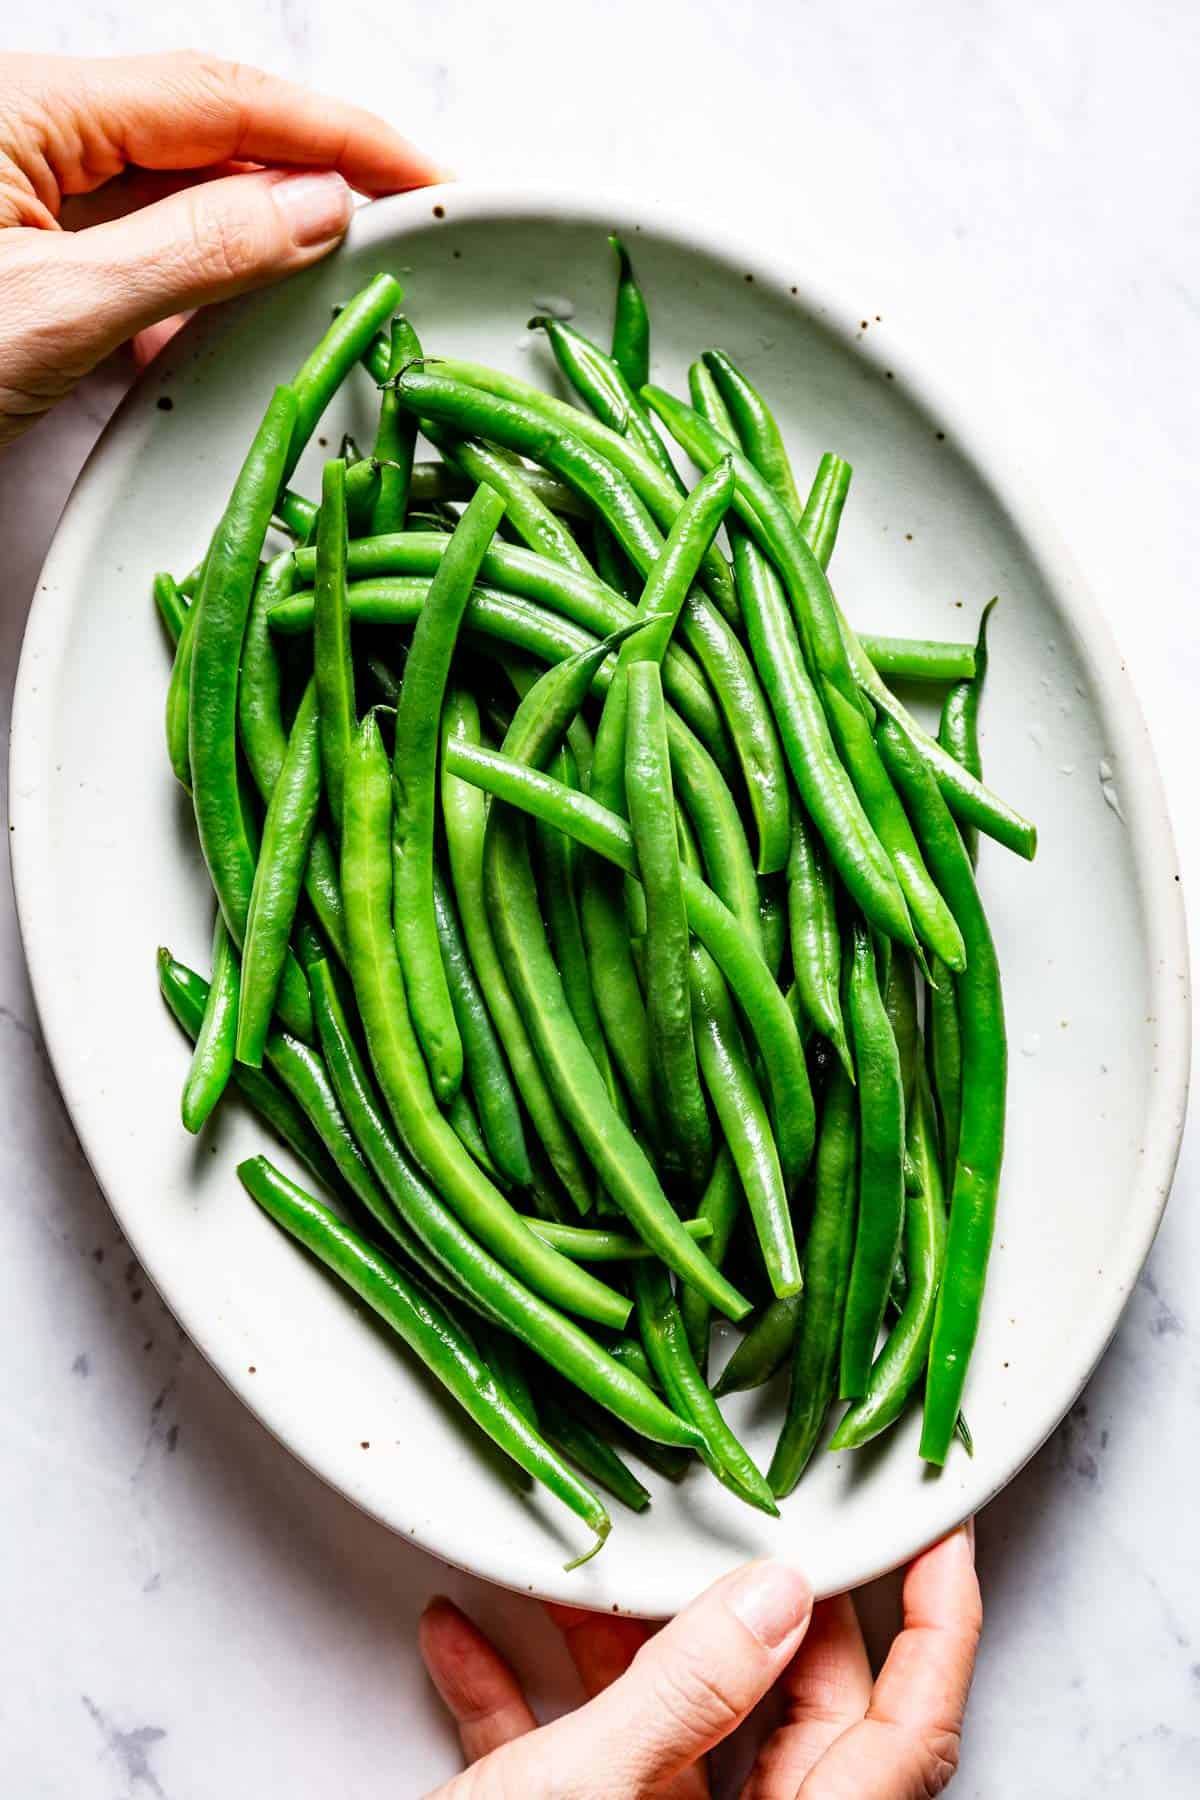 boiled green beans on a plate being served from the top